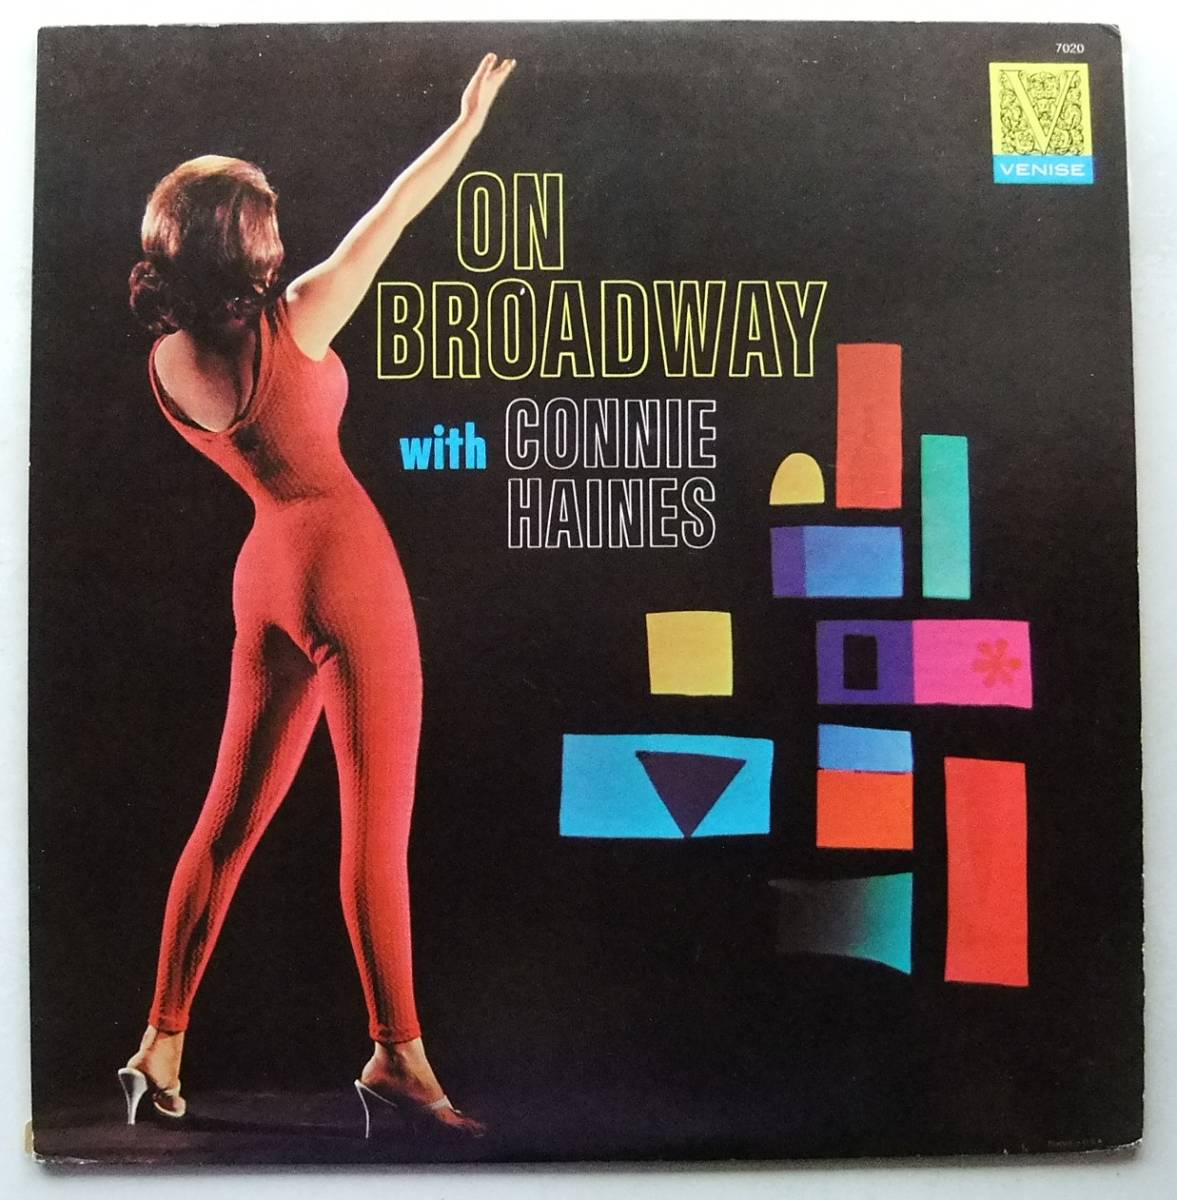 ◆ CONNIE HAINES / On Broadway ◆ Venise 7020 (dg) ◆ W_画像1